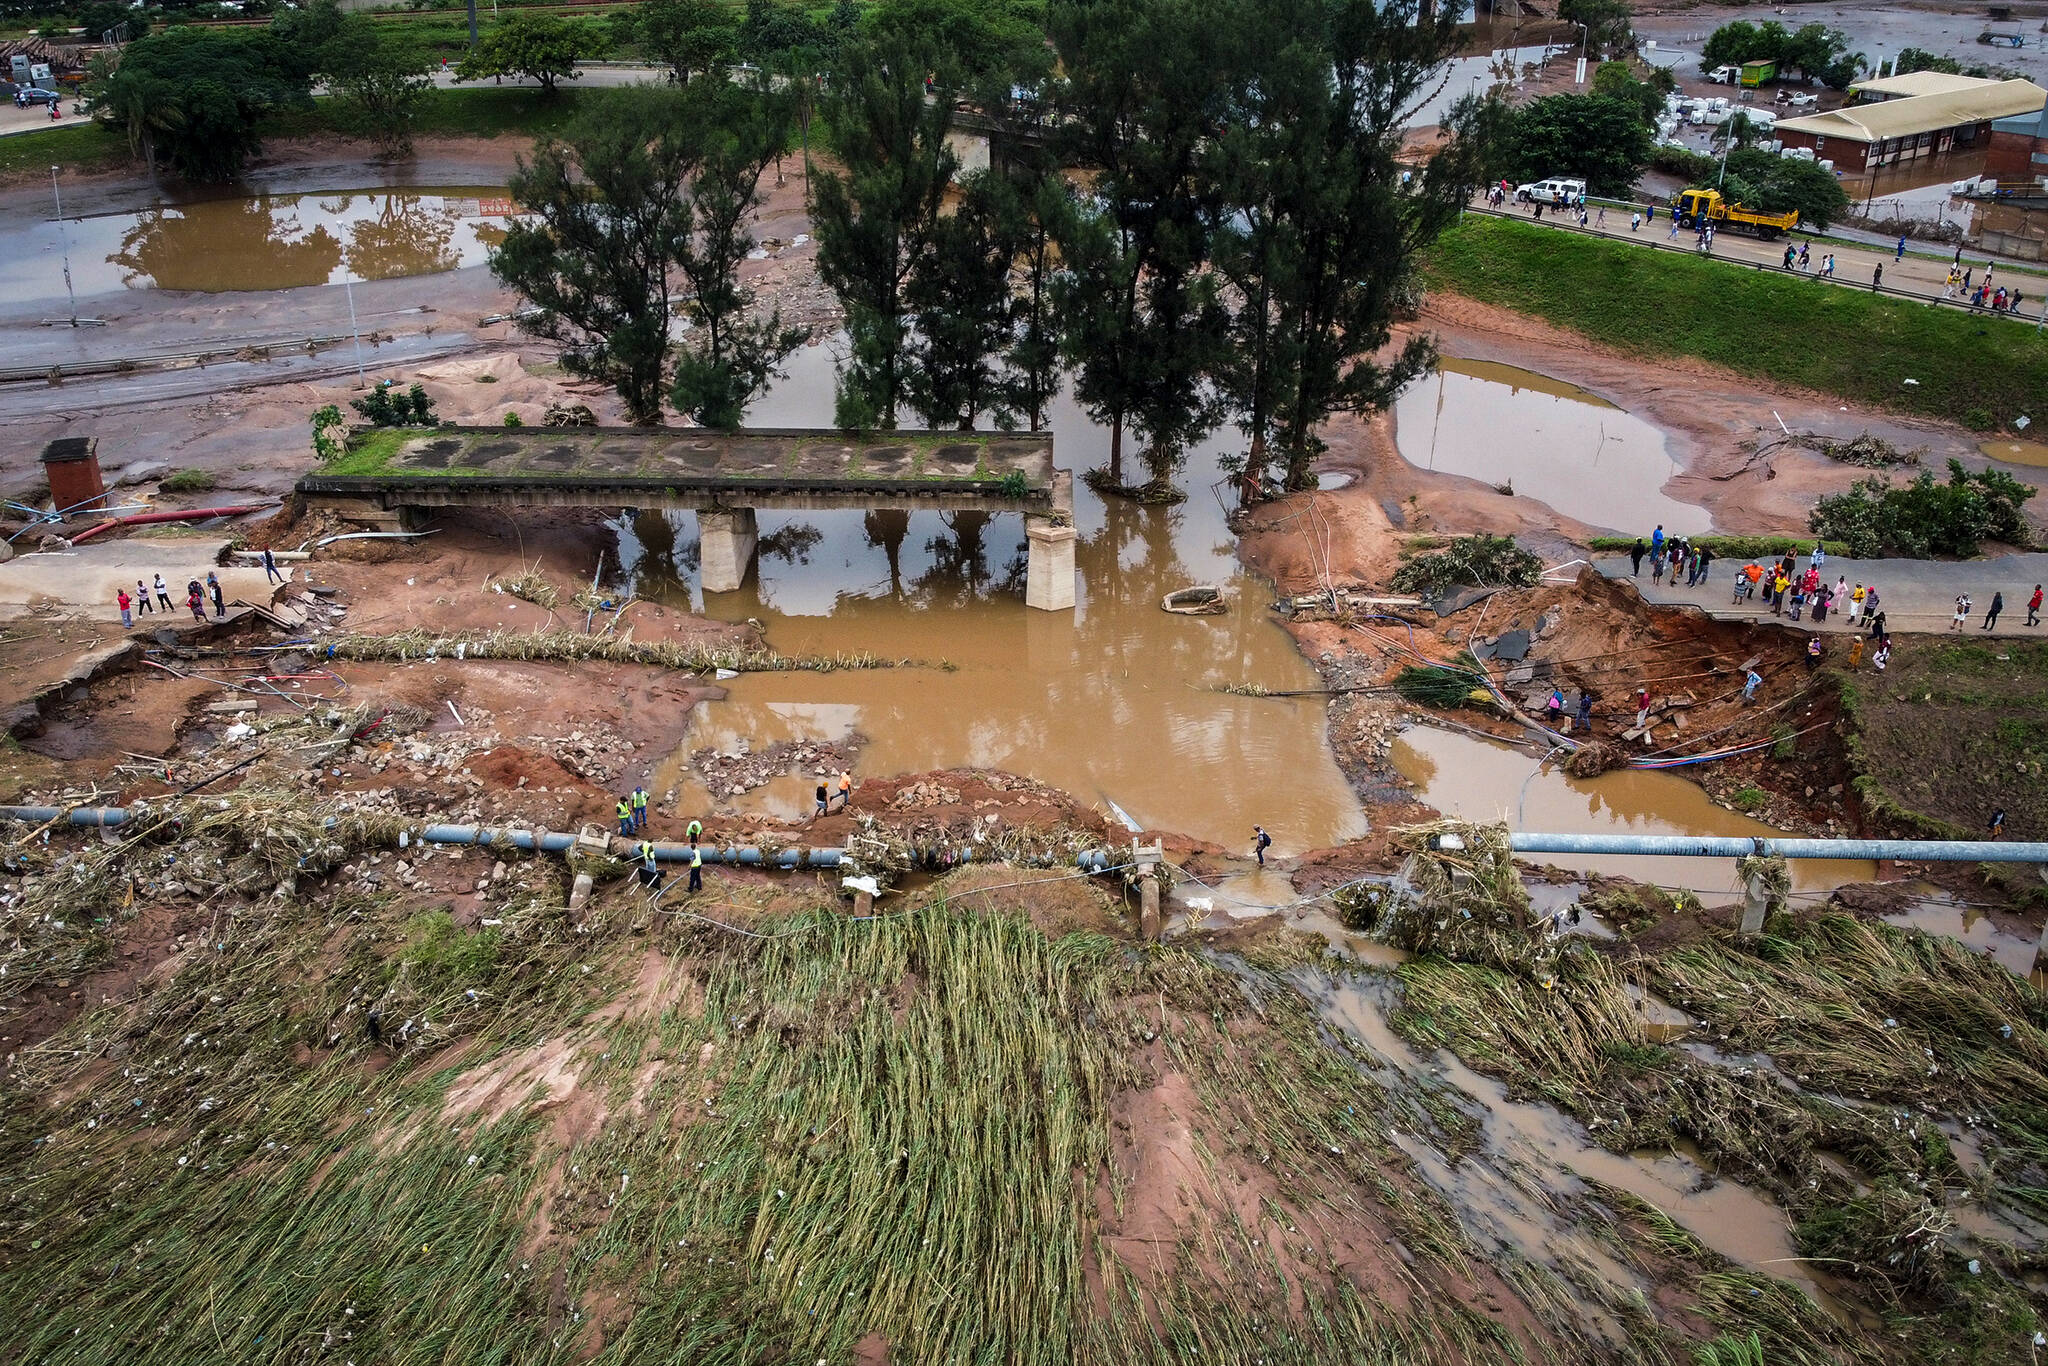 A collapsed bridge on the Griffiths Mxenge Highway after flooding in Durban, South Africa, Wednesday, April 13, 2022. Devastating floods in South Africa this week, as well as other extreme weather events across the continent linked to human-caused climate change, are putting marine and terrestrial wildlife species at risk, according to biodiversity experts. (AP Photo/Shiraaz Mohamed, File)